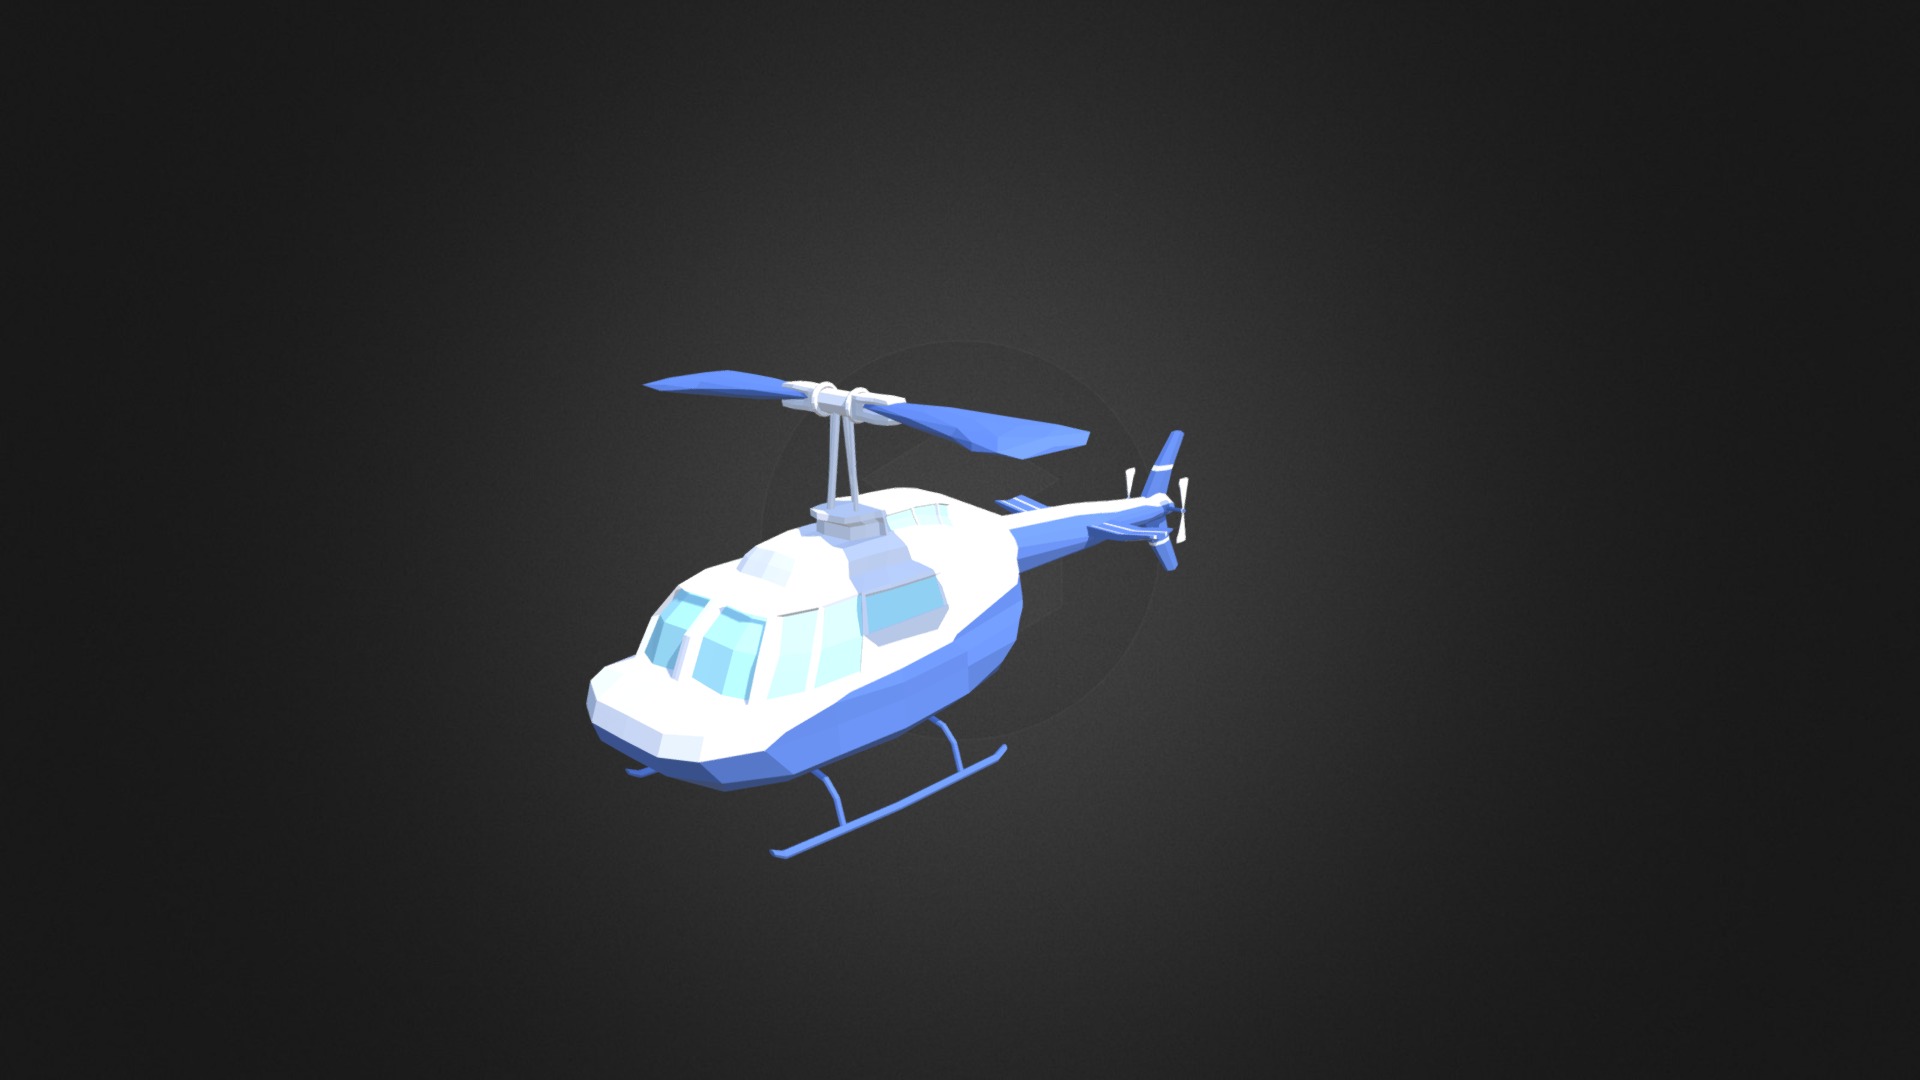 3D model Helicopter - This is a 3D model of the Helicopter. The 3D model is about a blue and white helicopter.